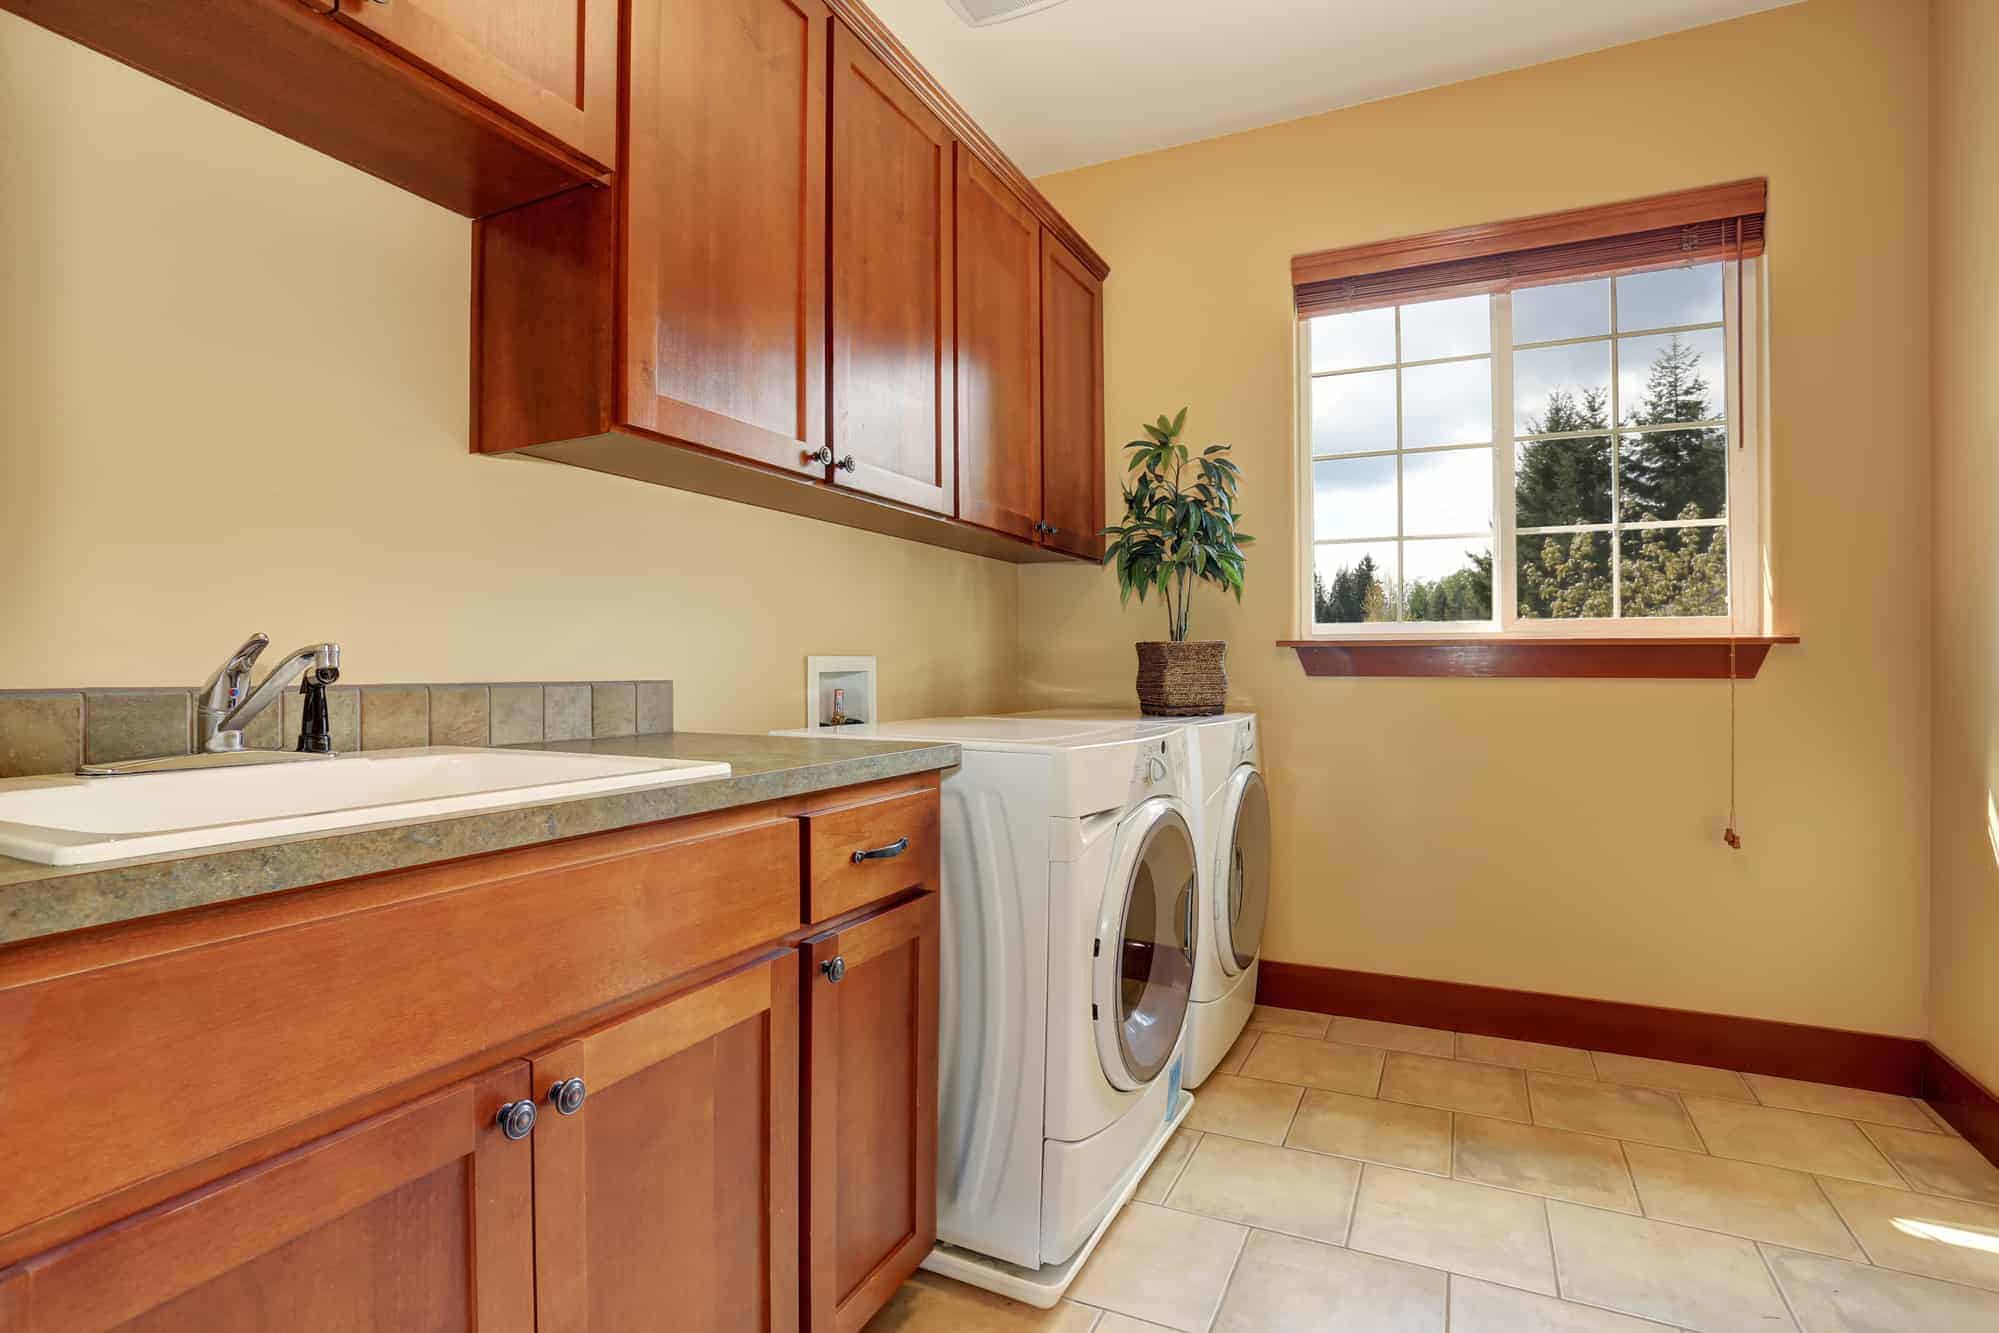 How To Soundproof Laundry Room